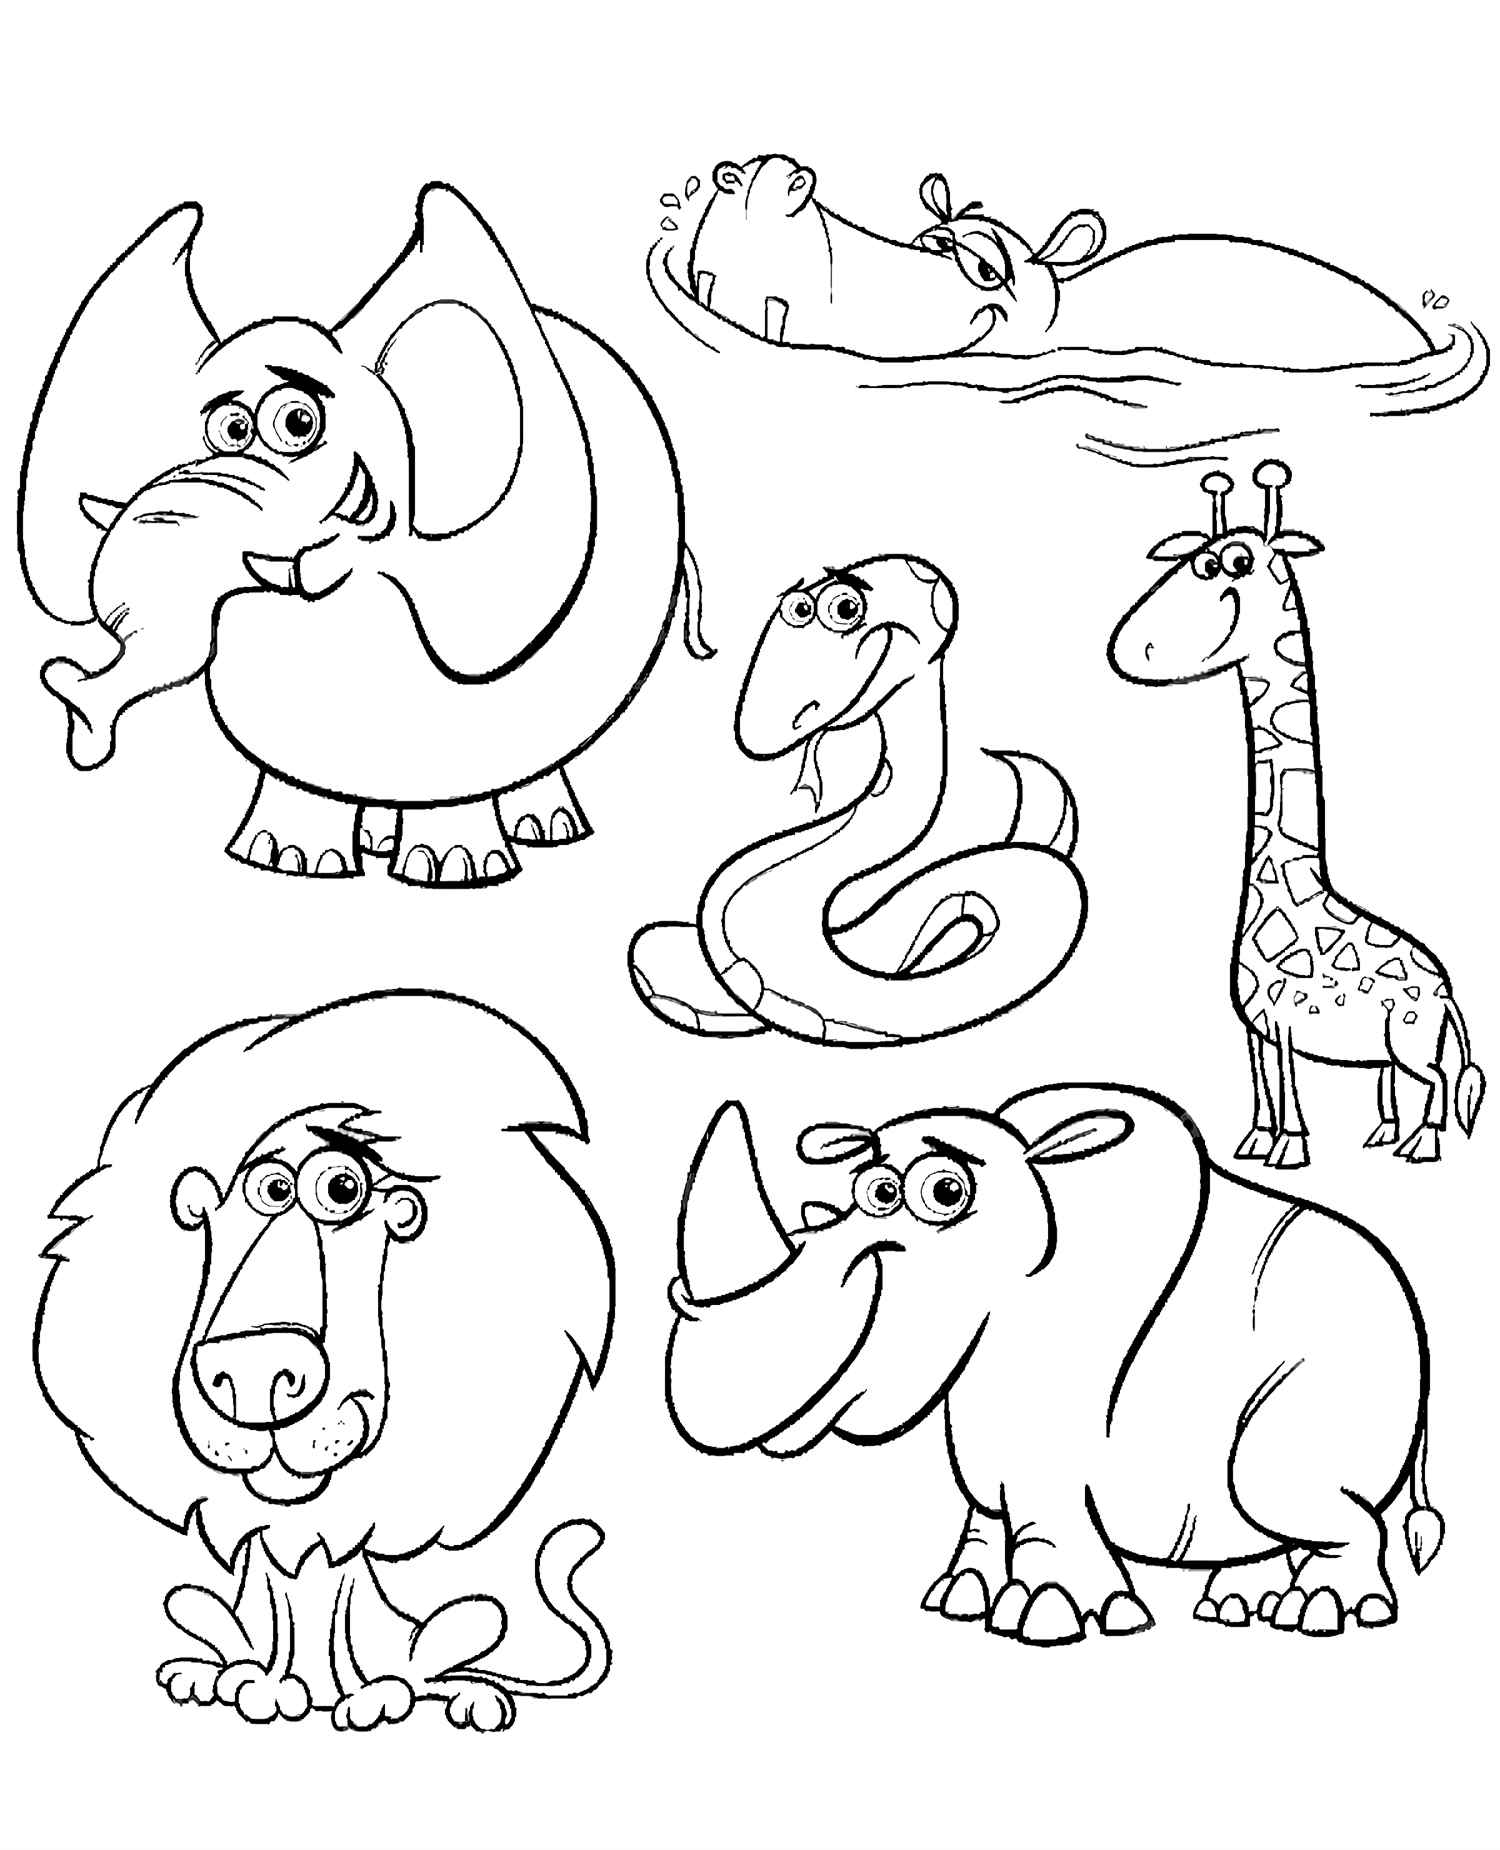 Free African Animals Coloring Pages Pdf - African Animals Simple Coloring Page